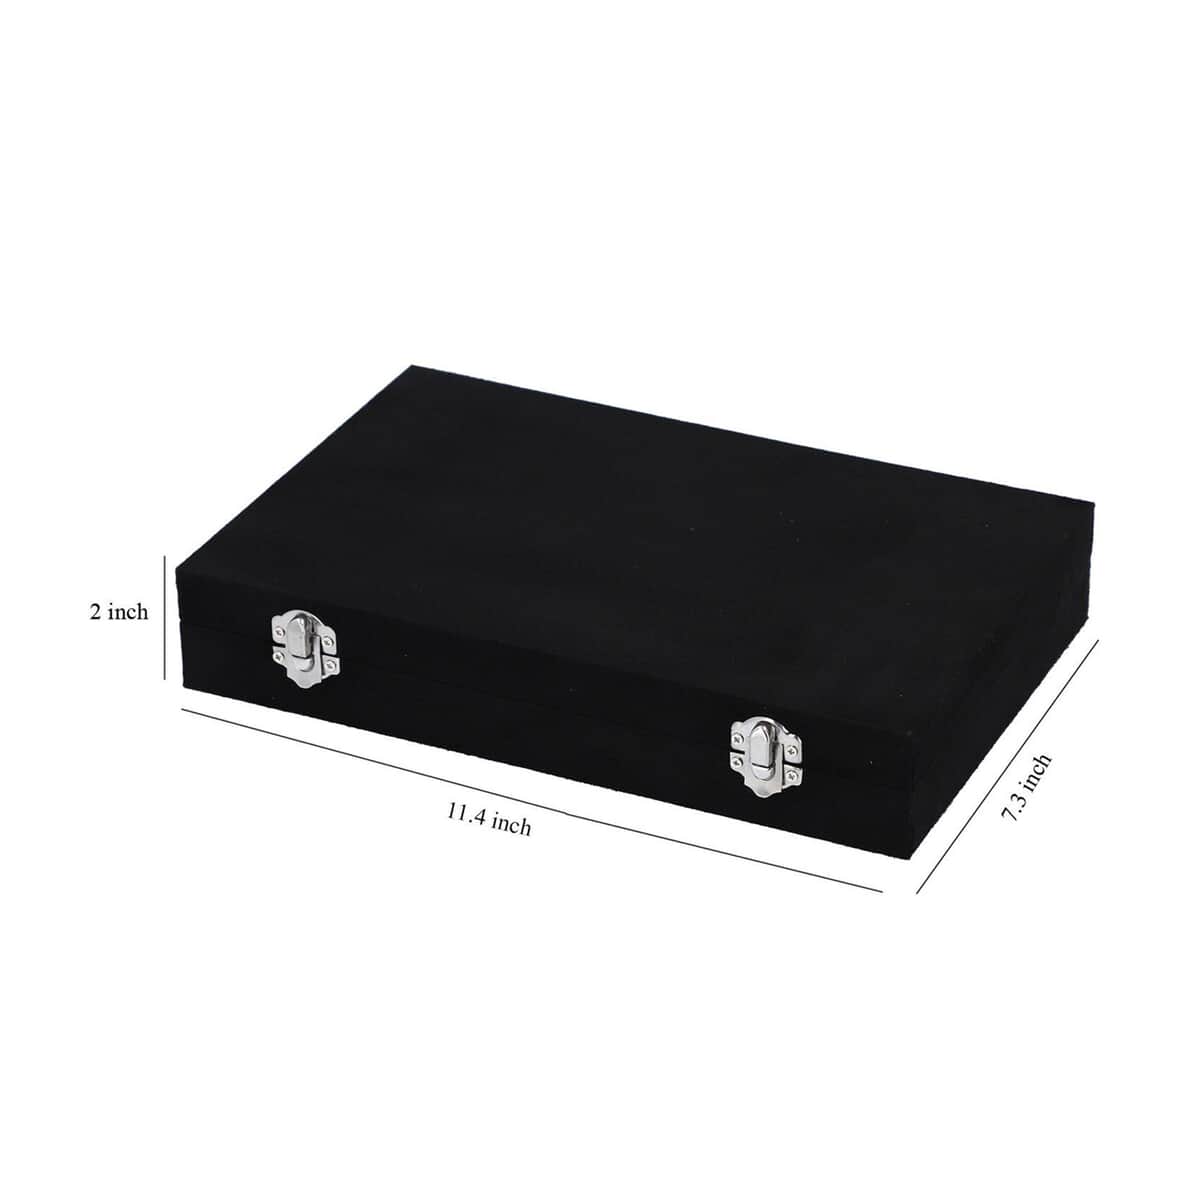 Black Velvet Jewelry Box with Anti Tarnish Lining & Lock, Anti Tarnish Jewelry Case, Jewelry Organizer, Jewelry Storage Box (8 Necklace Hooks, 8 Earrings/Pendant Sections and 10 Rings Slots) image number 4